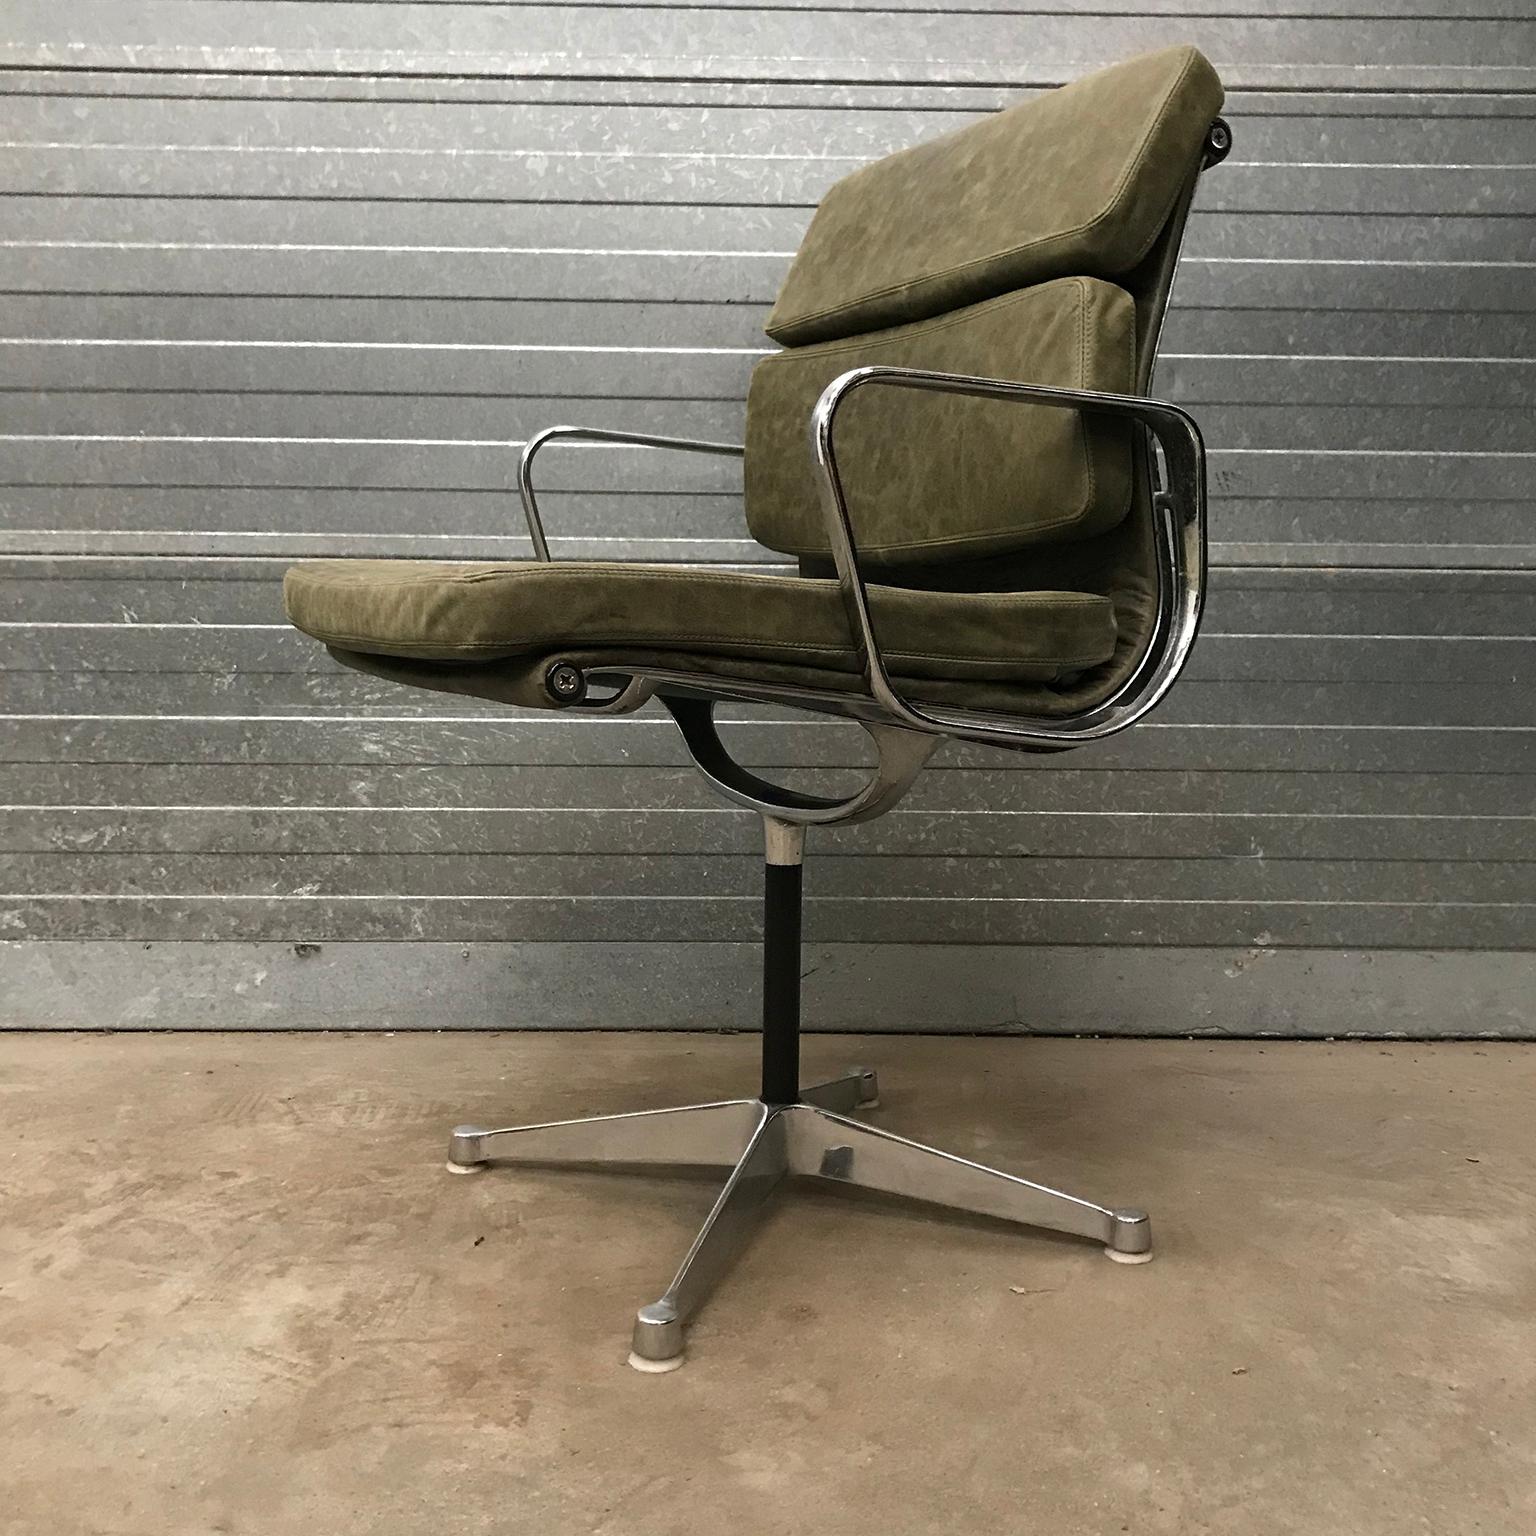 Softpad EA 217 in beautiful vintage leather. The leather shows some differences in color which adds to its character. The back has a new green upholstery. The base and legs are in good condition beside some spots and races of usage. The chrome